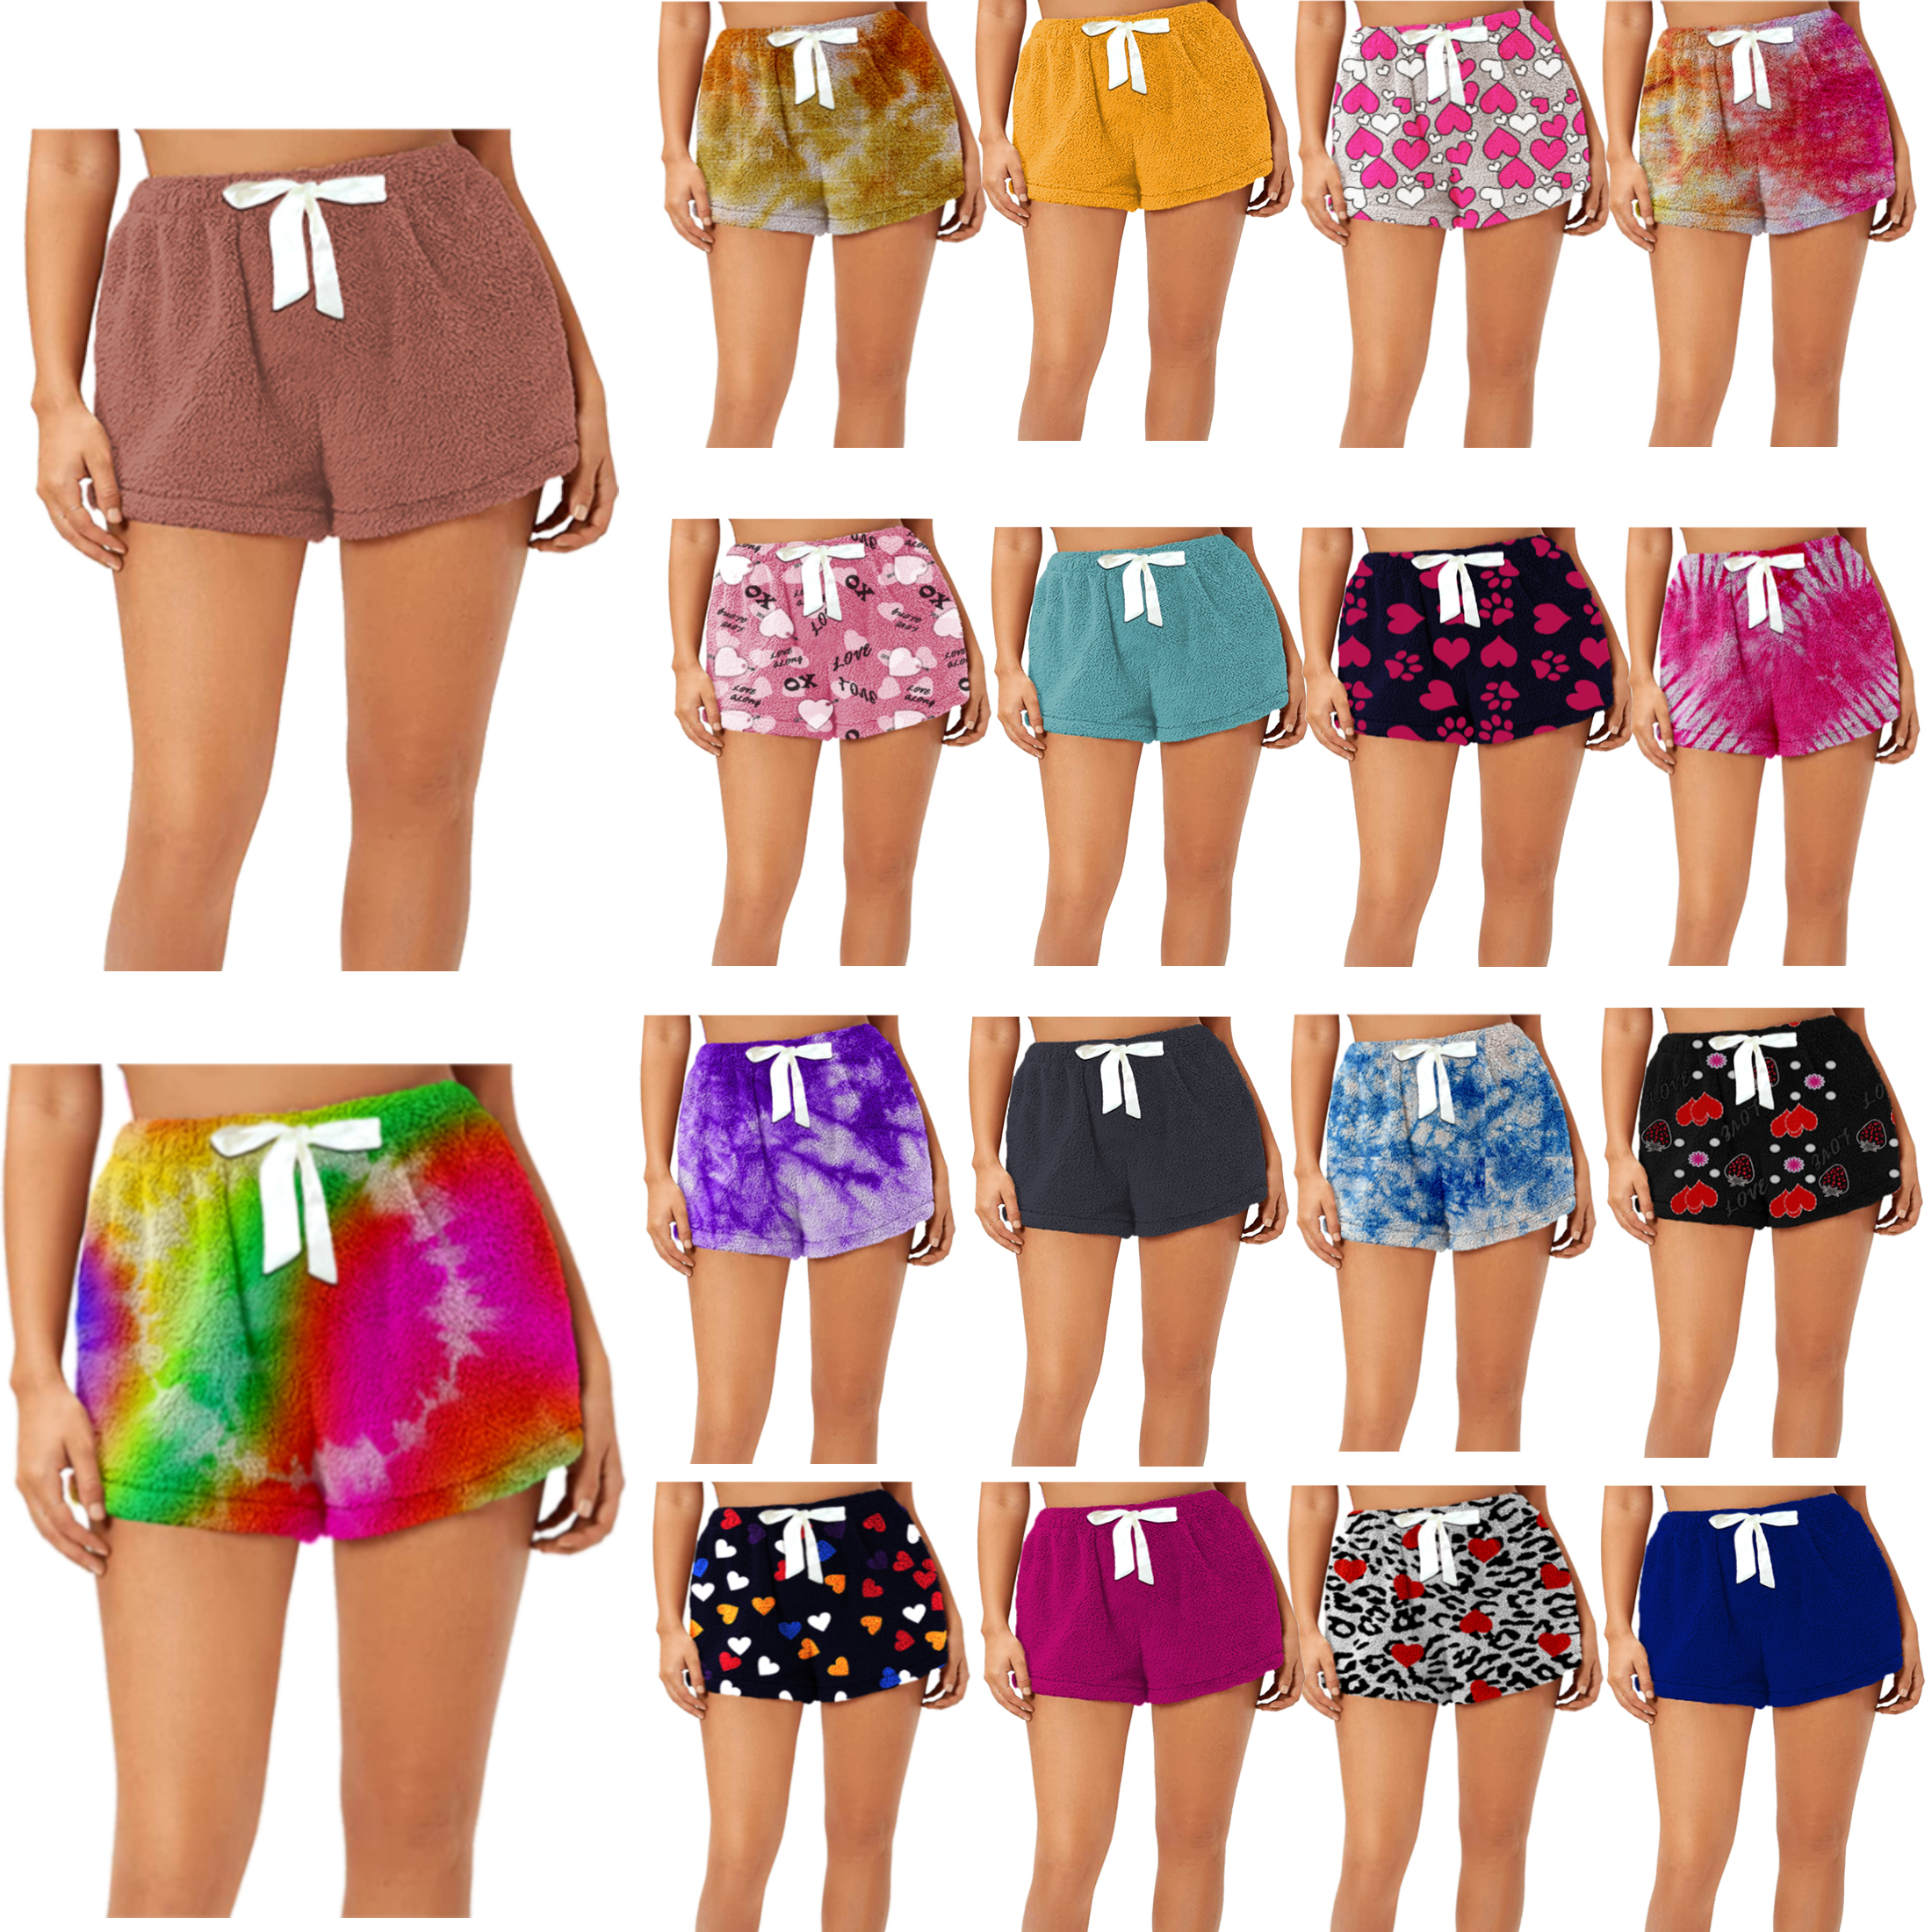 5-Pack: Women's Super Soft Micro Fleece Ultra Plush Pajama Shorts - Solid,TieDye,Solid, X-Large